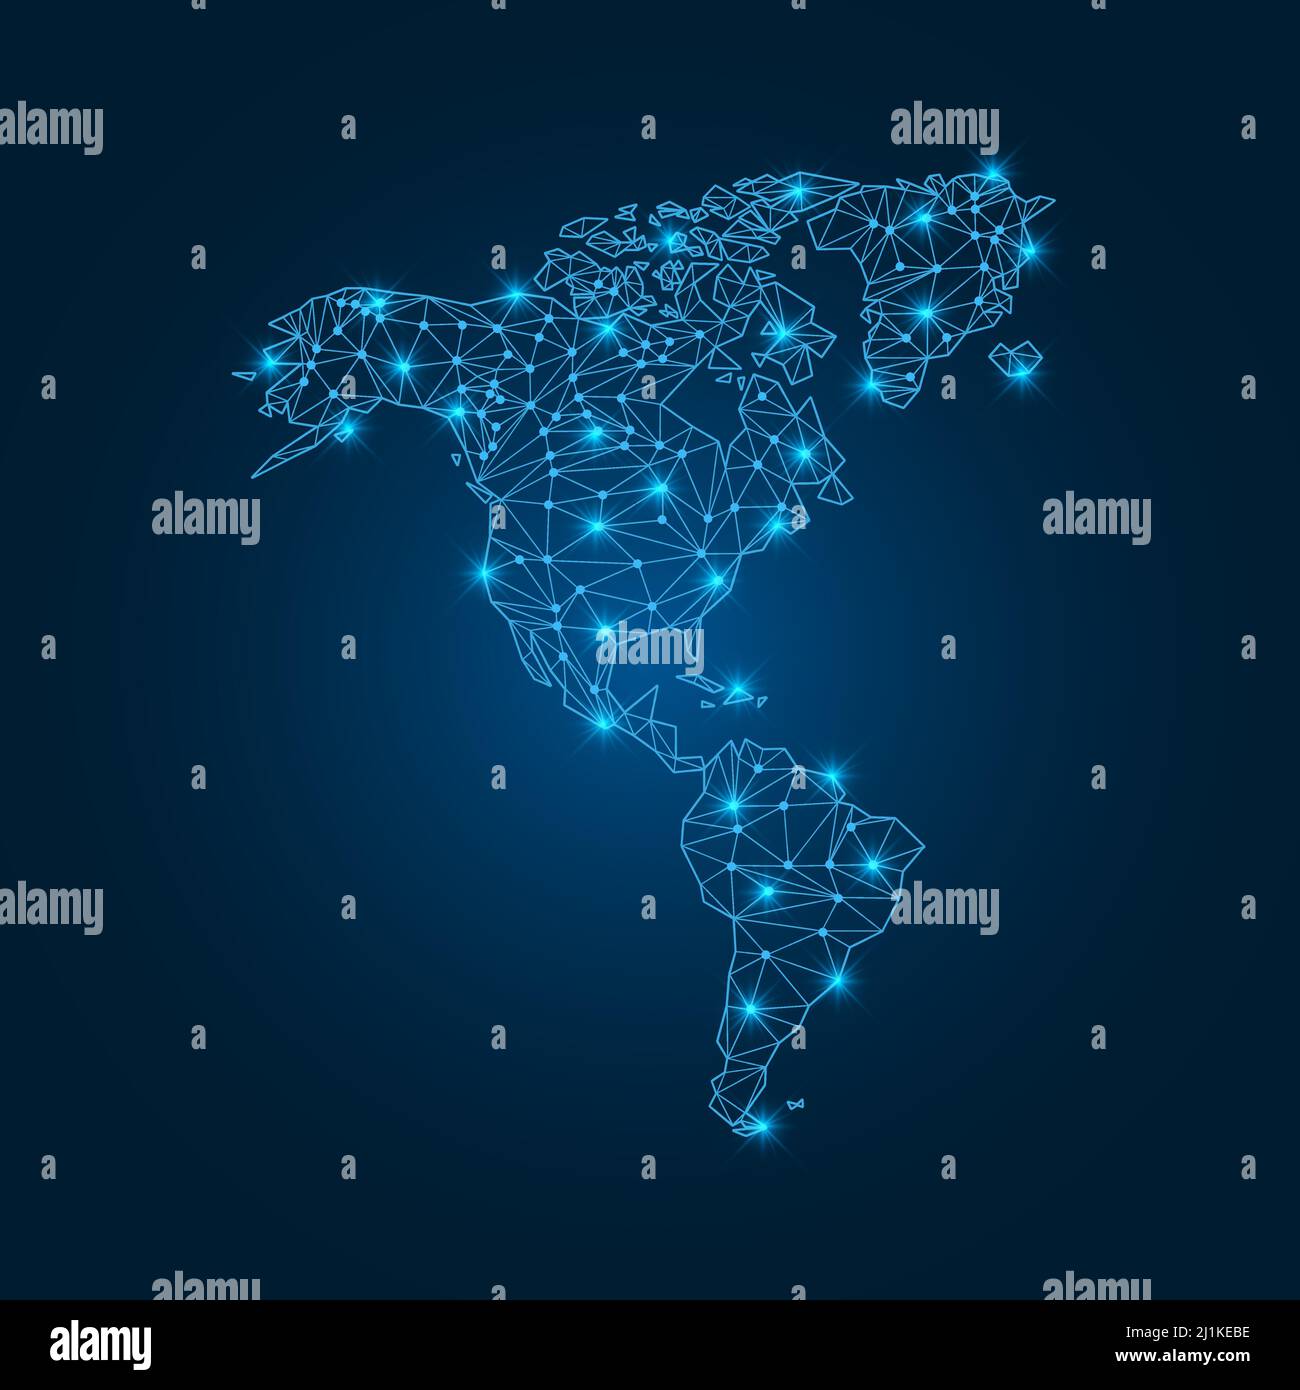 North and South America map with polygonal glowing shapes. Stock Vector